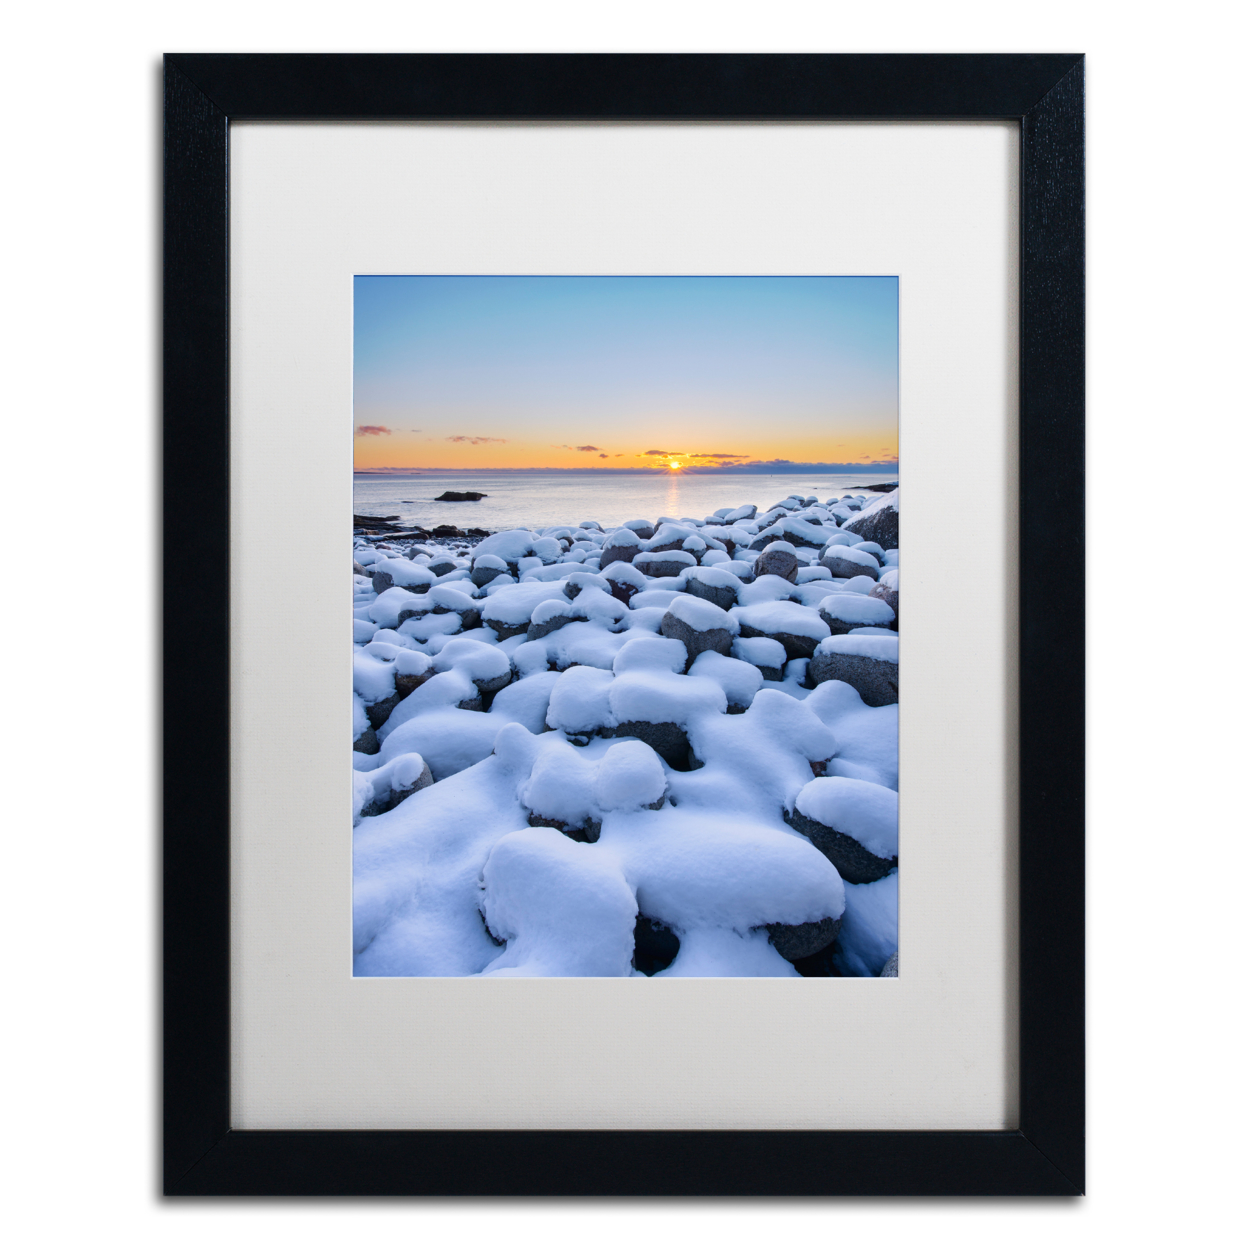 Michael Blanchette Photography 'Snowy Pebbles' Black Wooden Framed Art 18 X 22 Inches